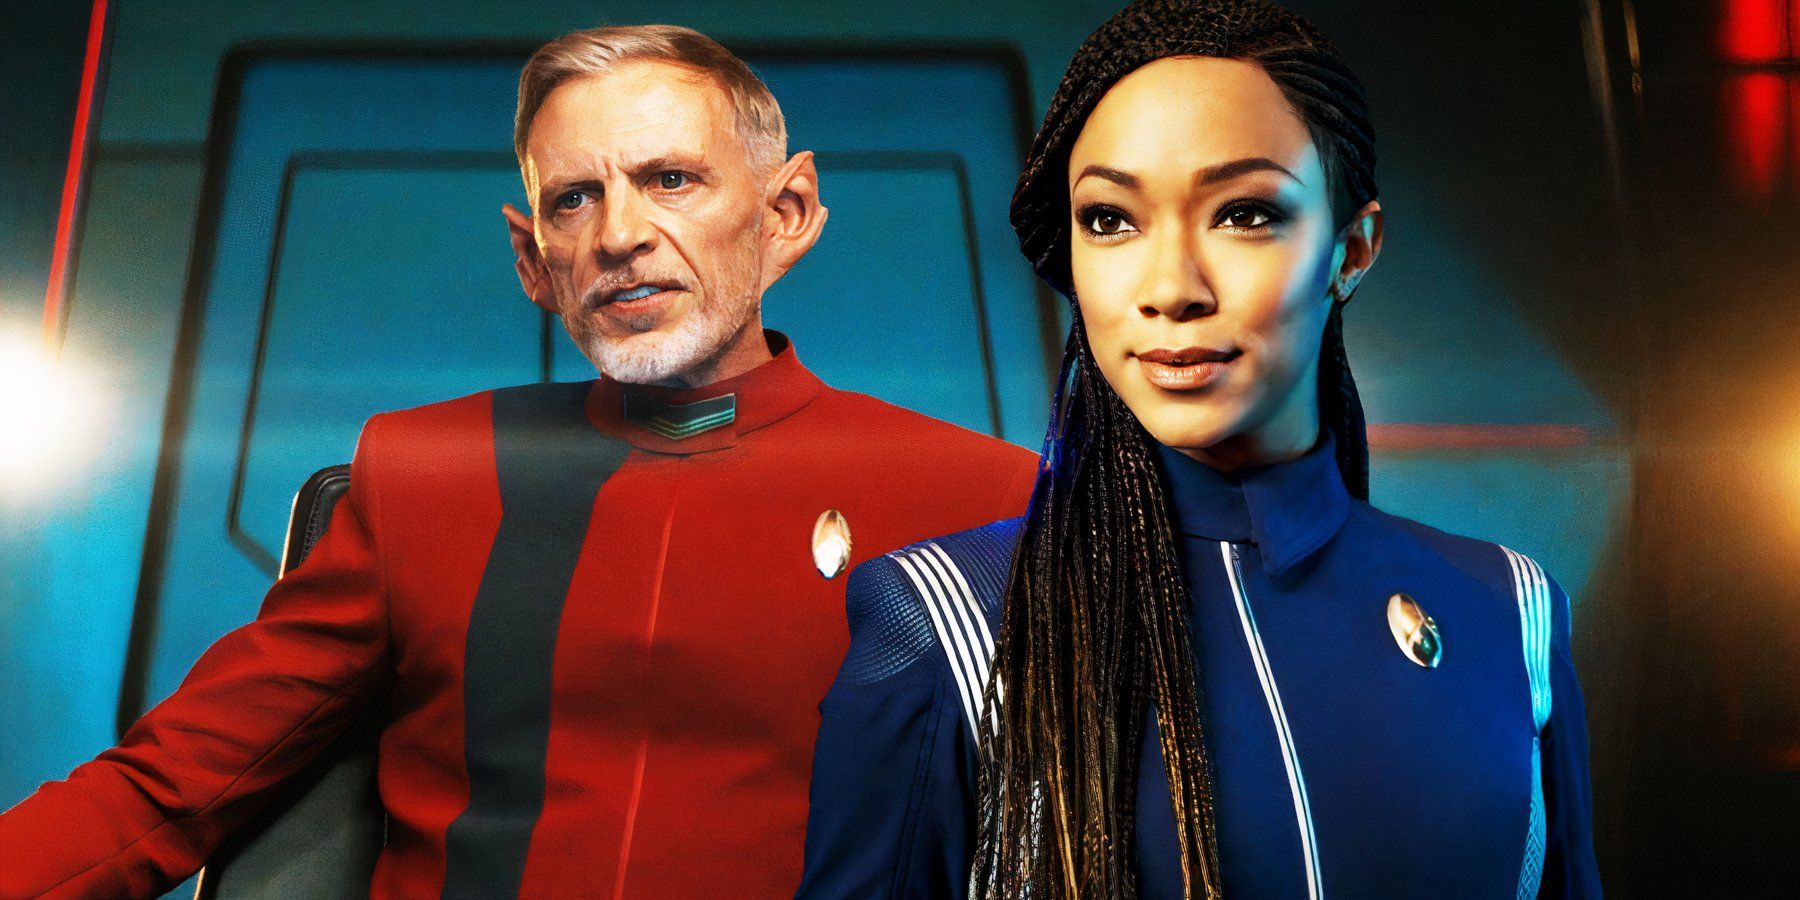 Commander Rayner in Discovery season 5 and Commander Burnham from Discovery season 3